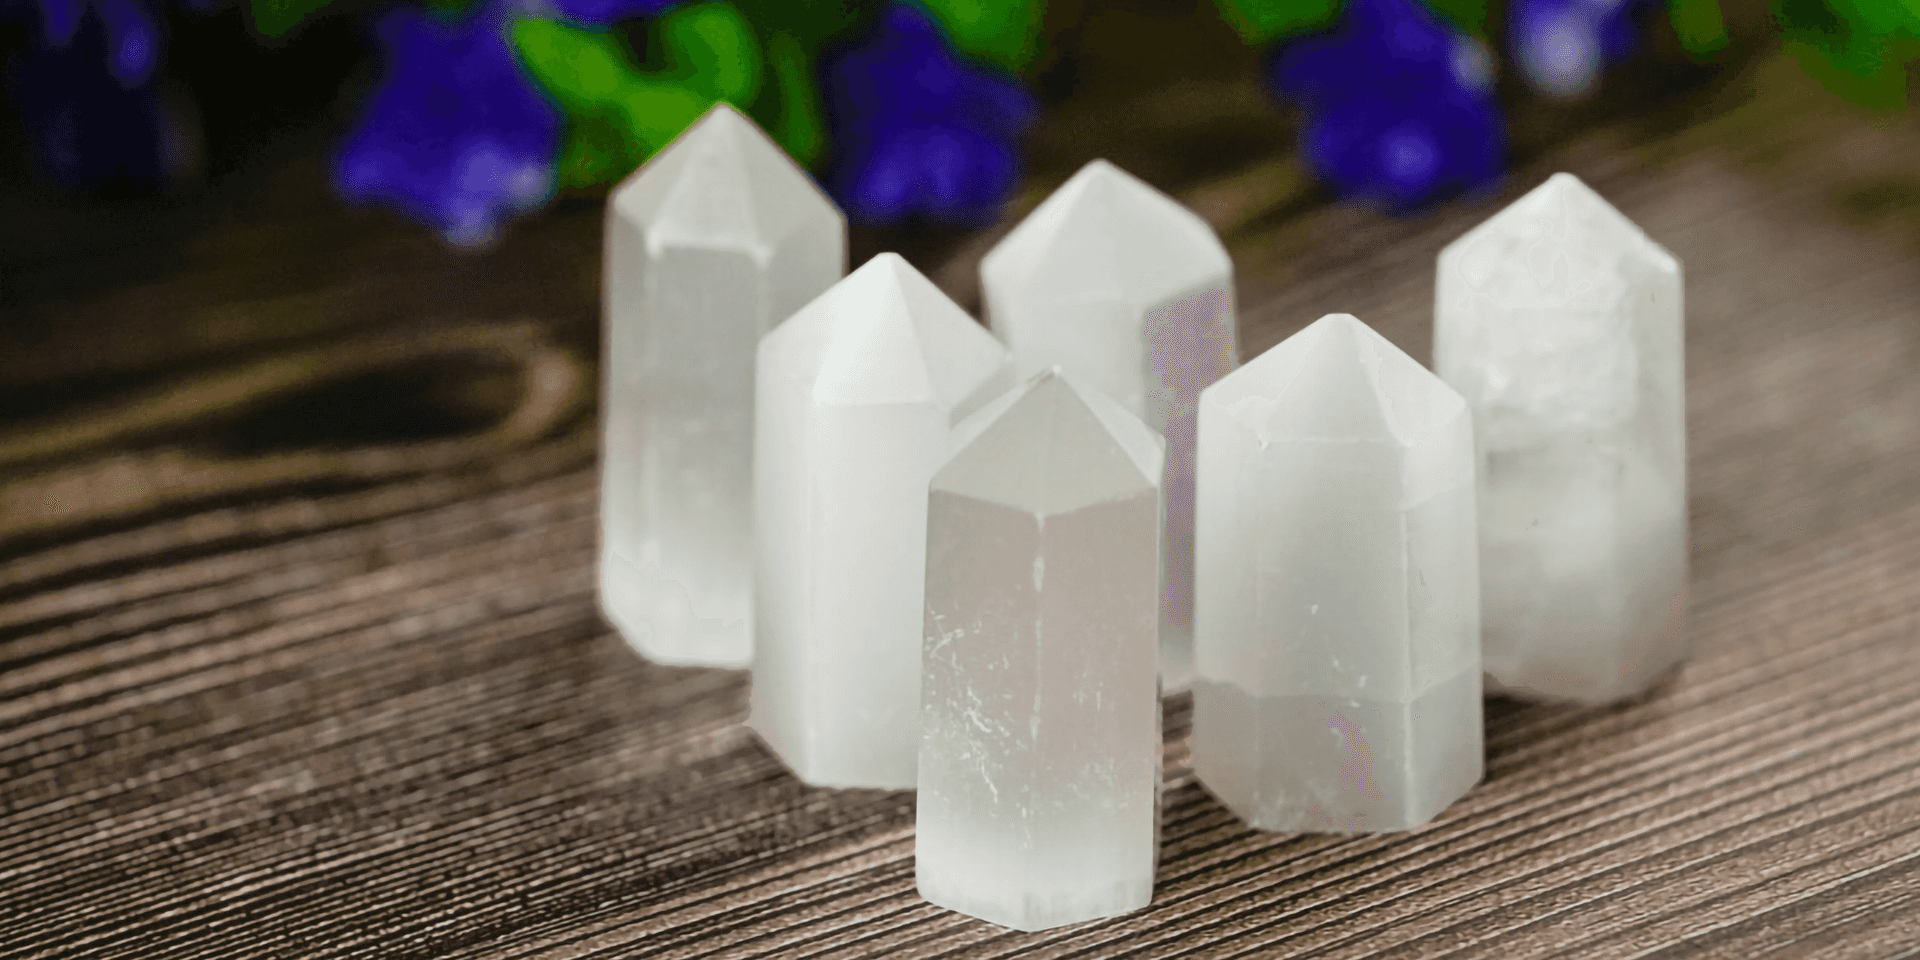 featured image thumbnail for post Is Selenite A Crystal? - Selenite vs Other Crystals